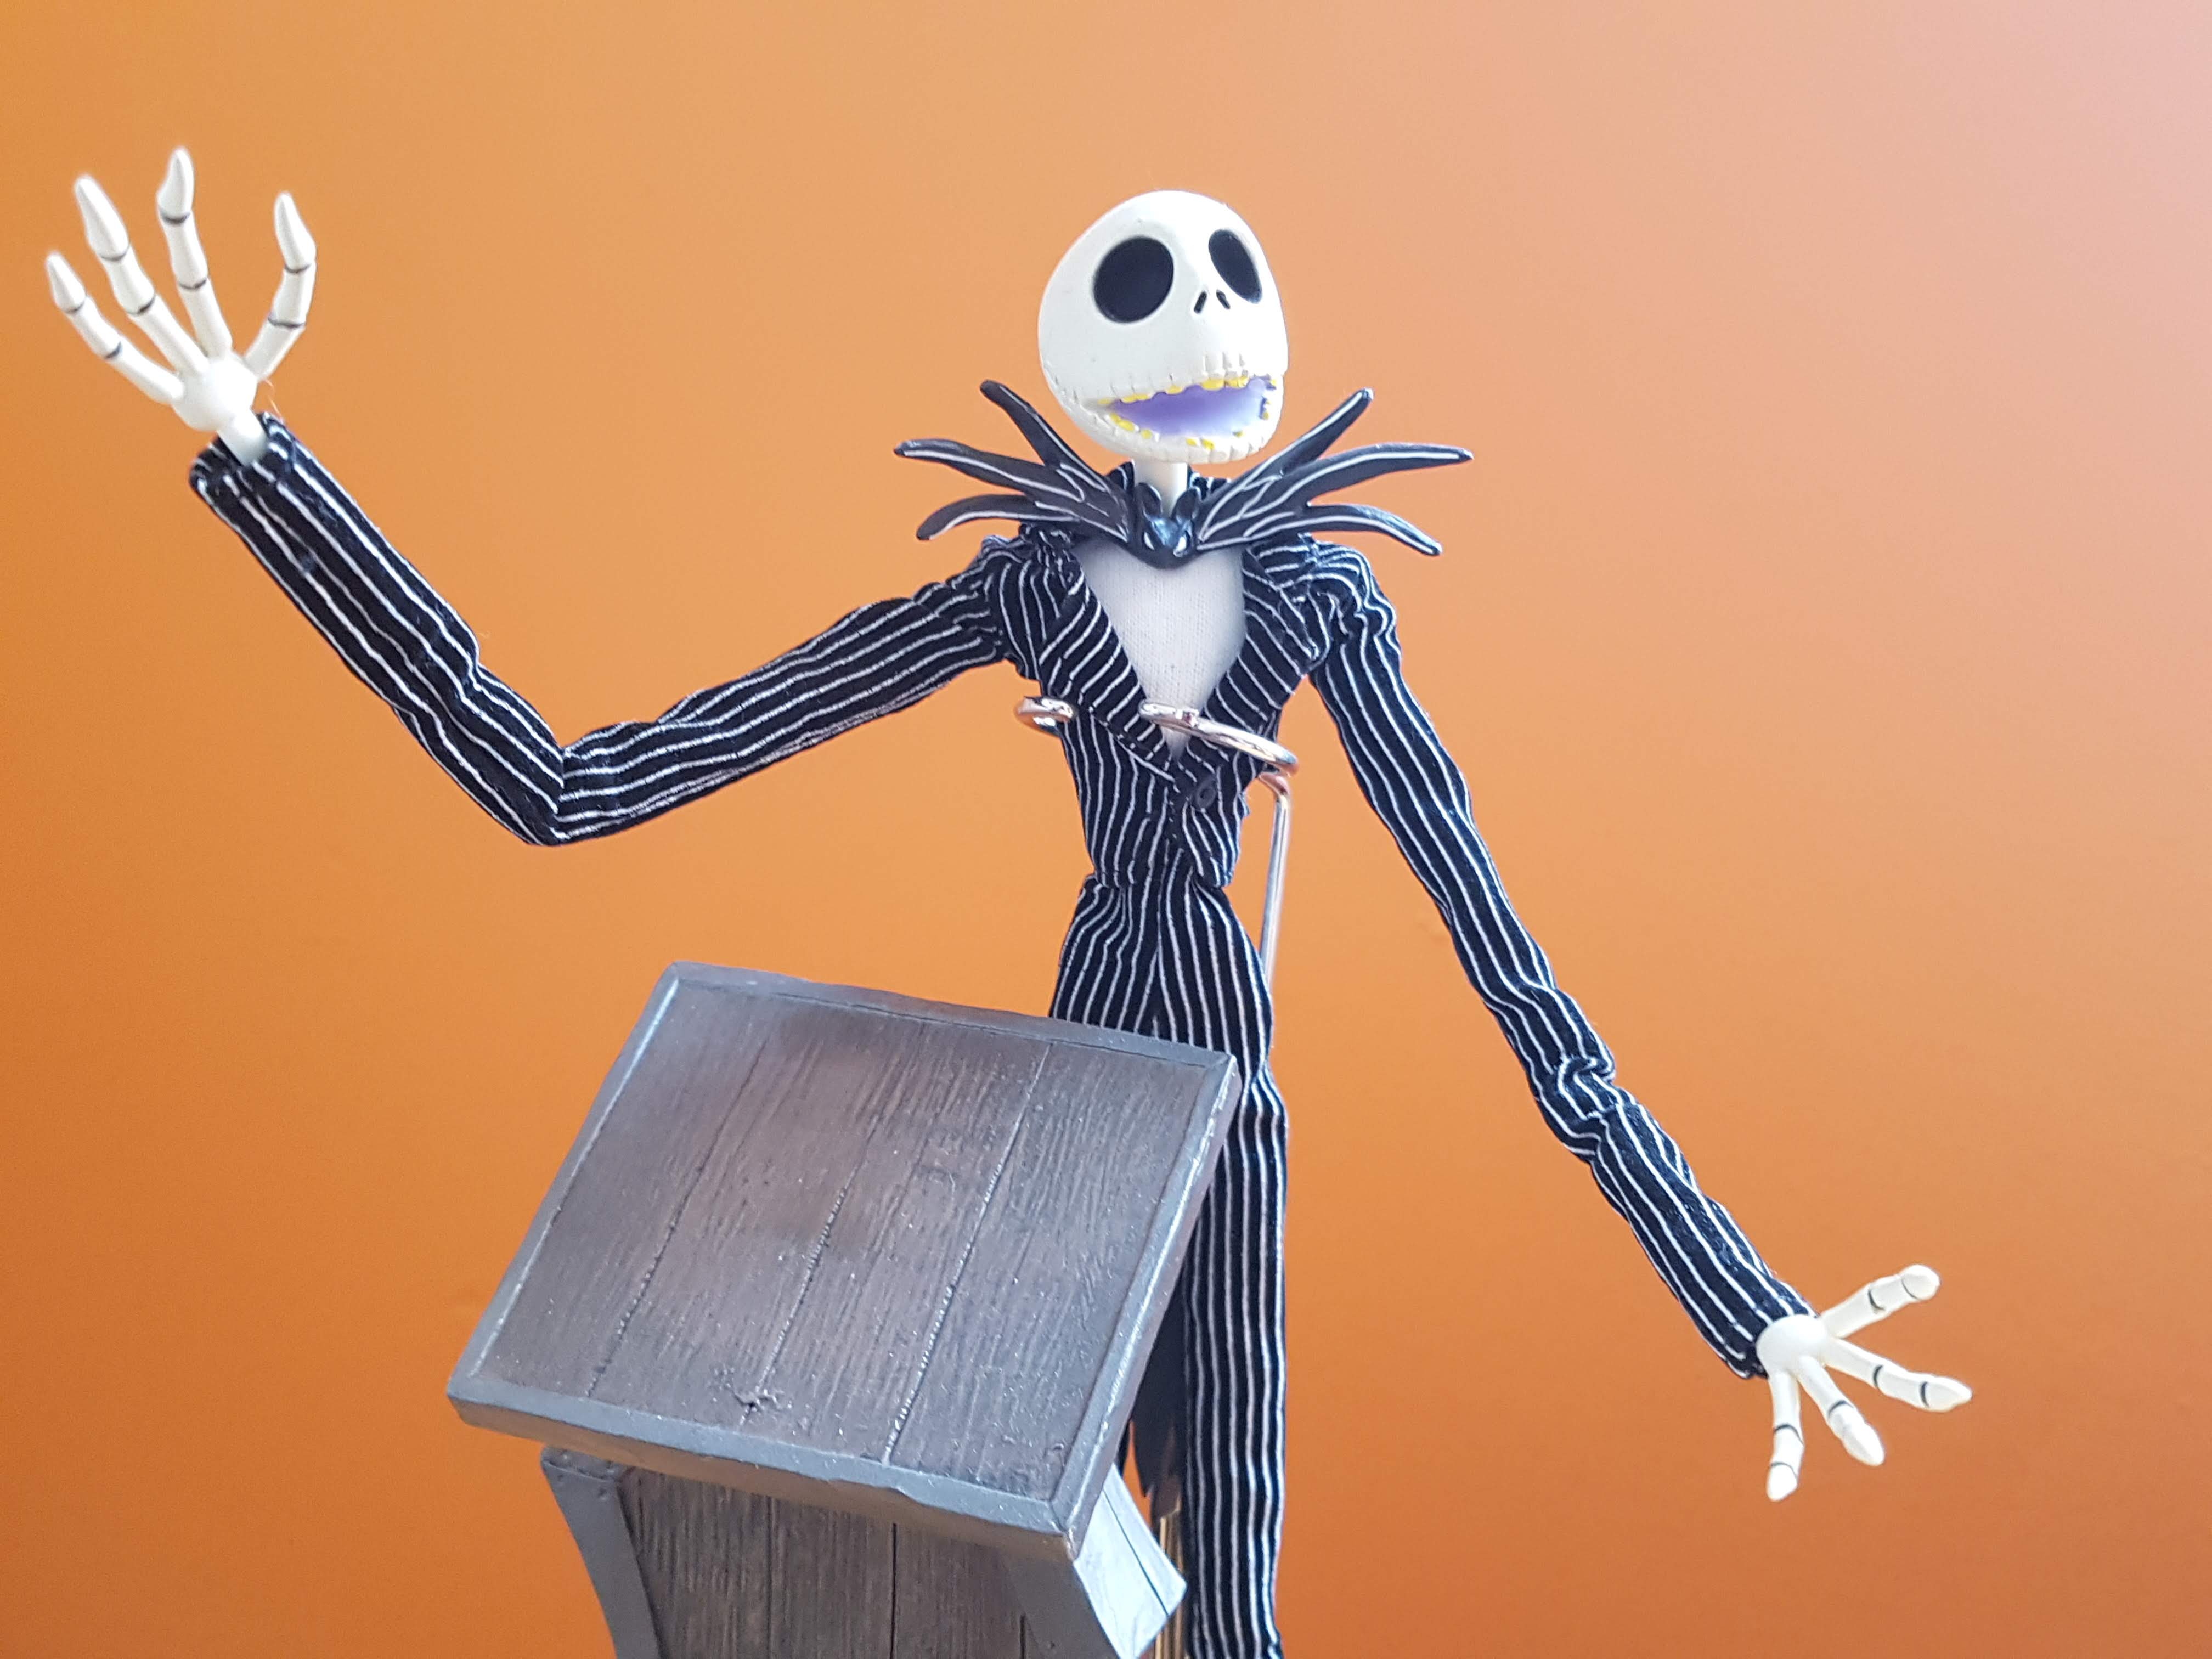 Stop Motion Without Compromise: The Nightmare Before Christmas